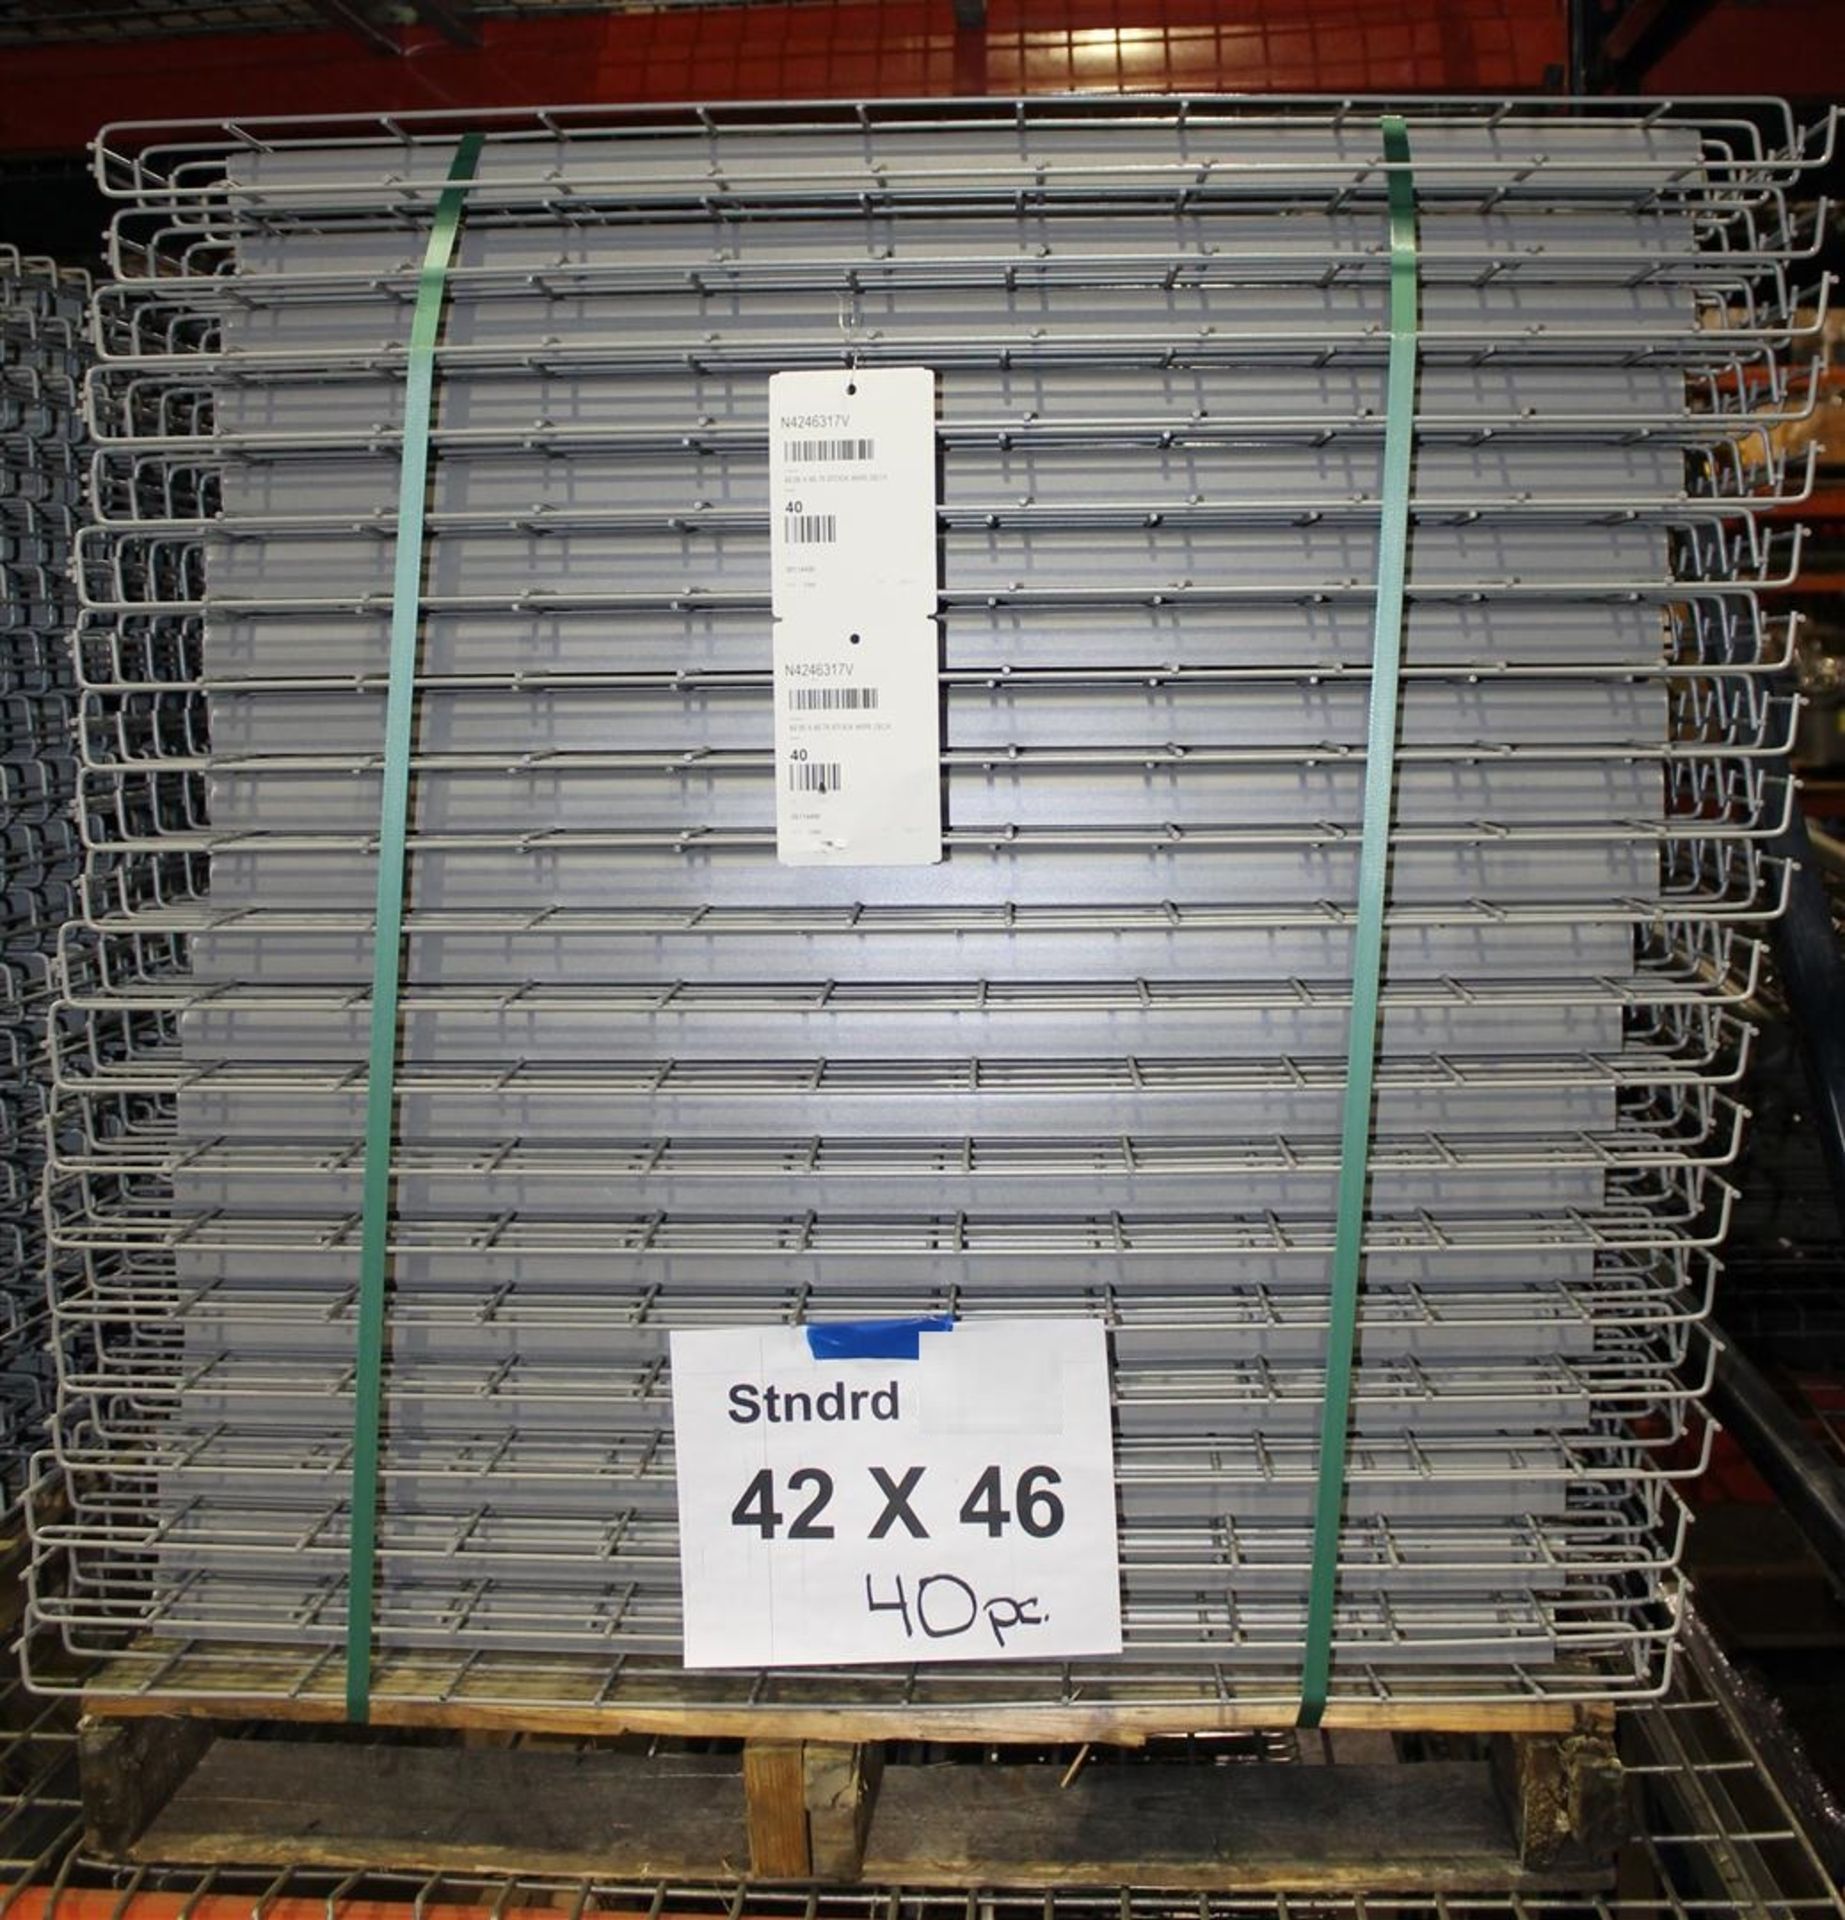 LIKE NEW TEAR DROP STYLE PALLET RACK WITH WIRE DECKING. SIZE: 144"H X 96"L X 42"D, FULL TRUCK LOAD - Image 5 of 5